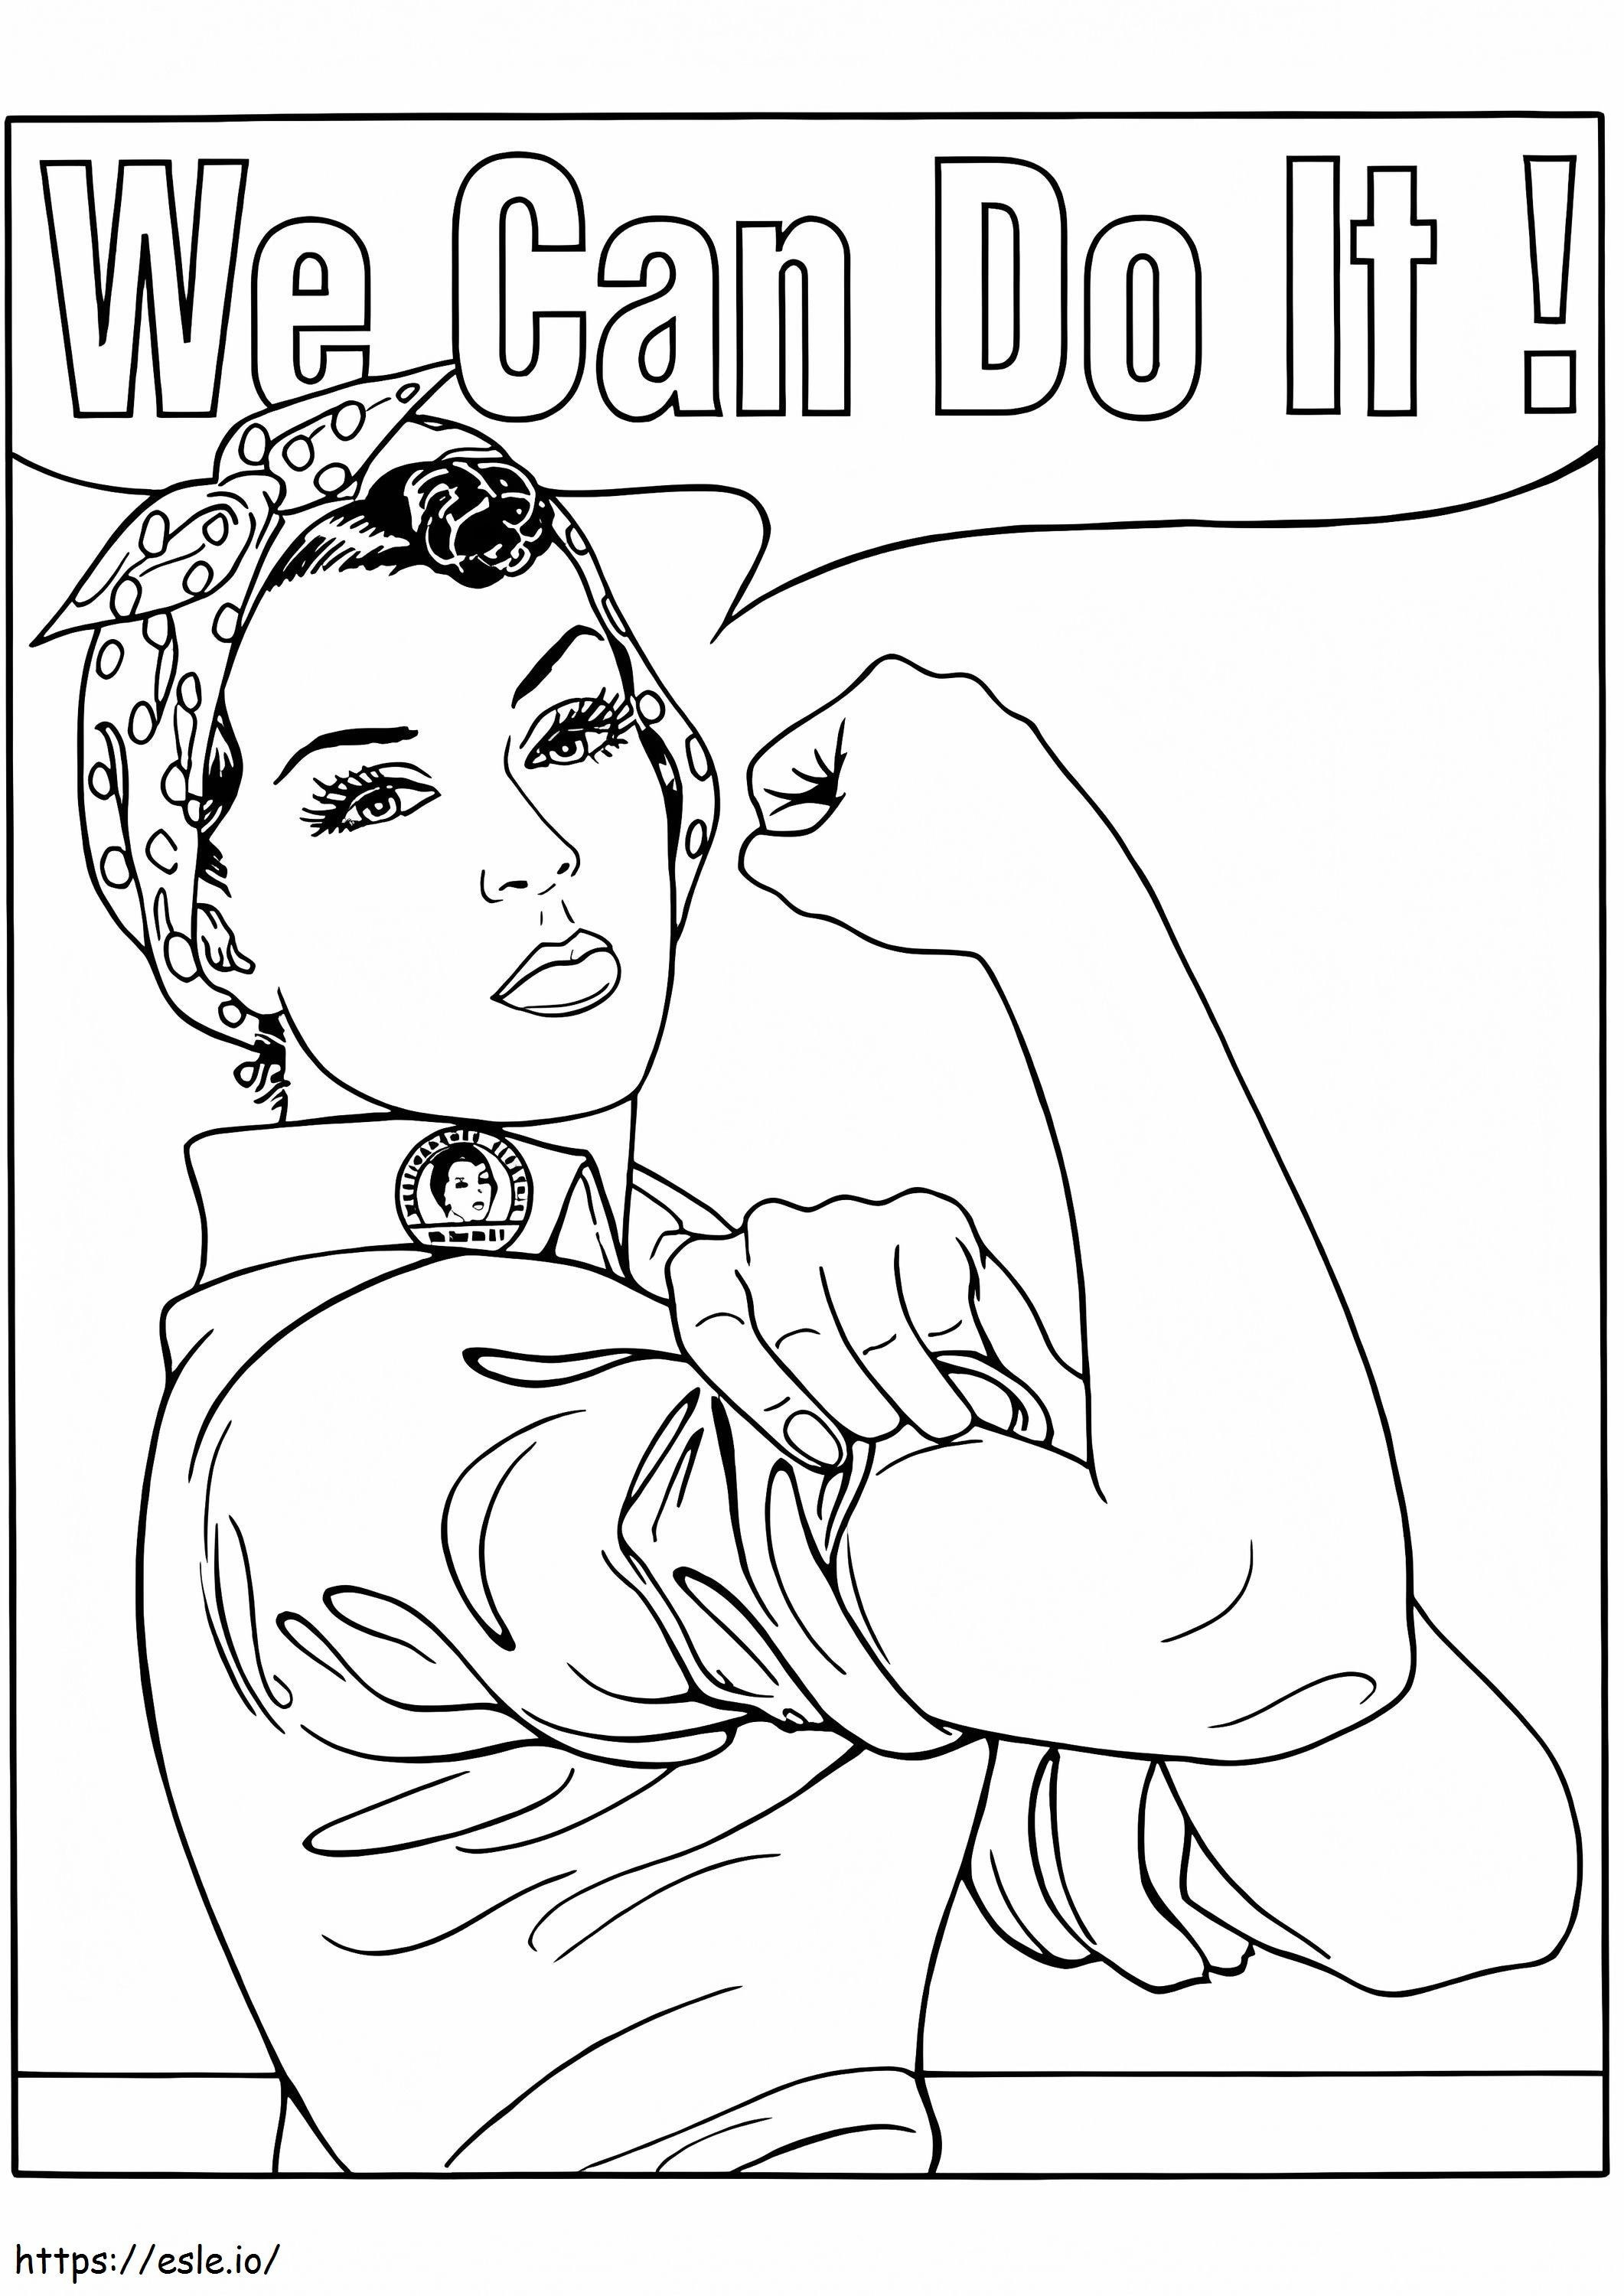 We Can Do It Poster Vintage coloring page